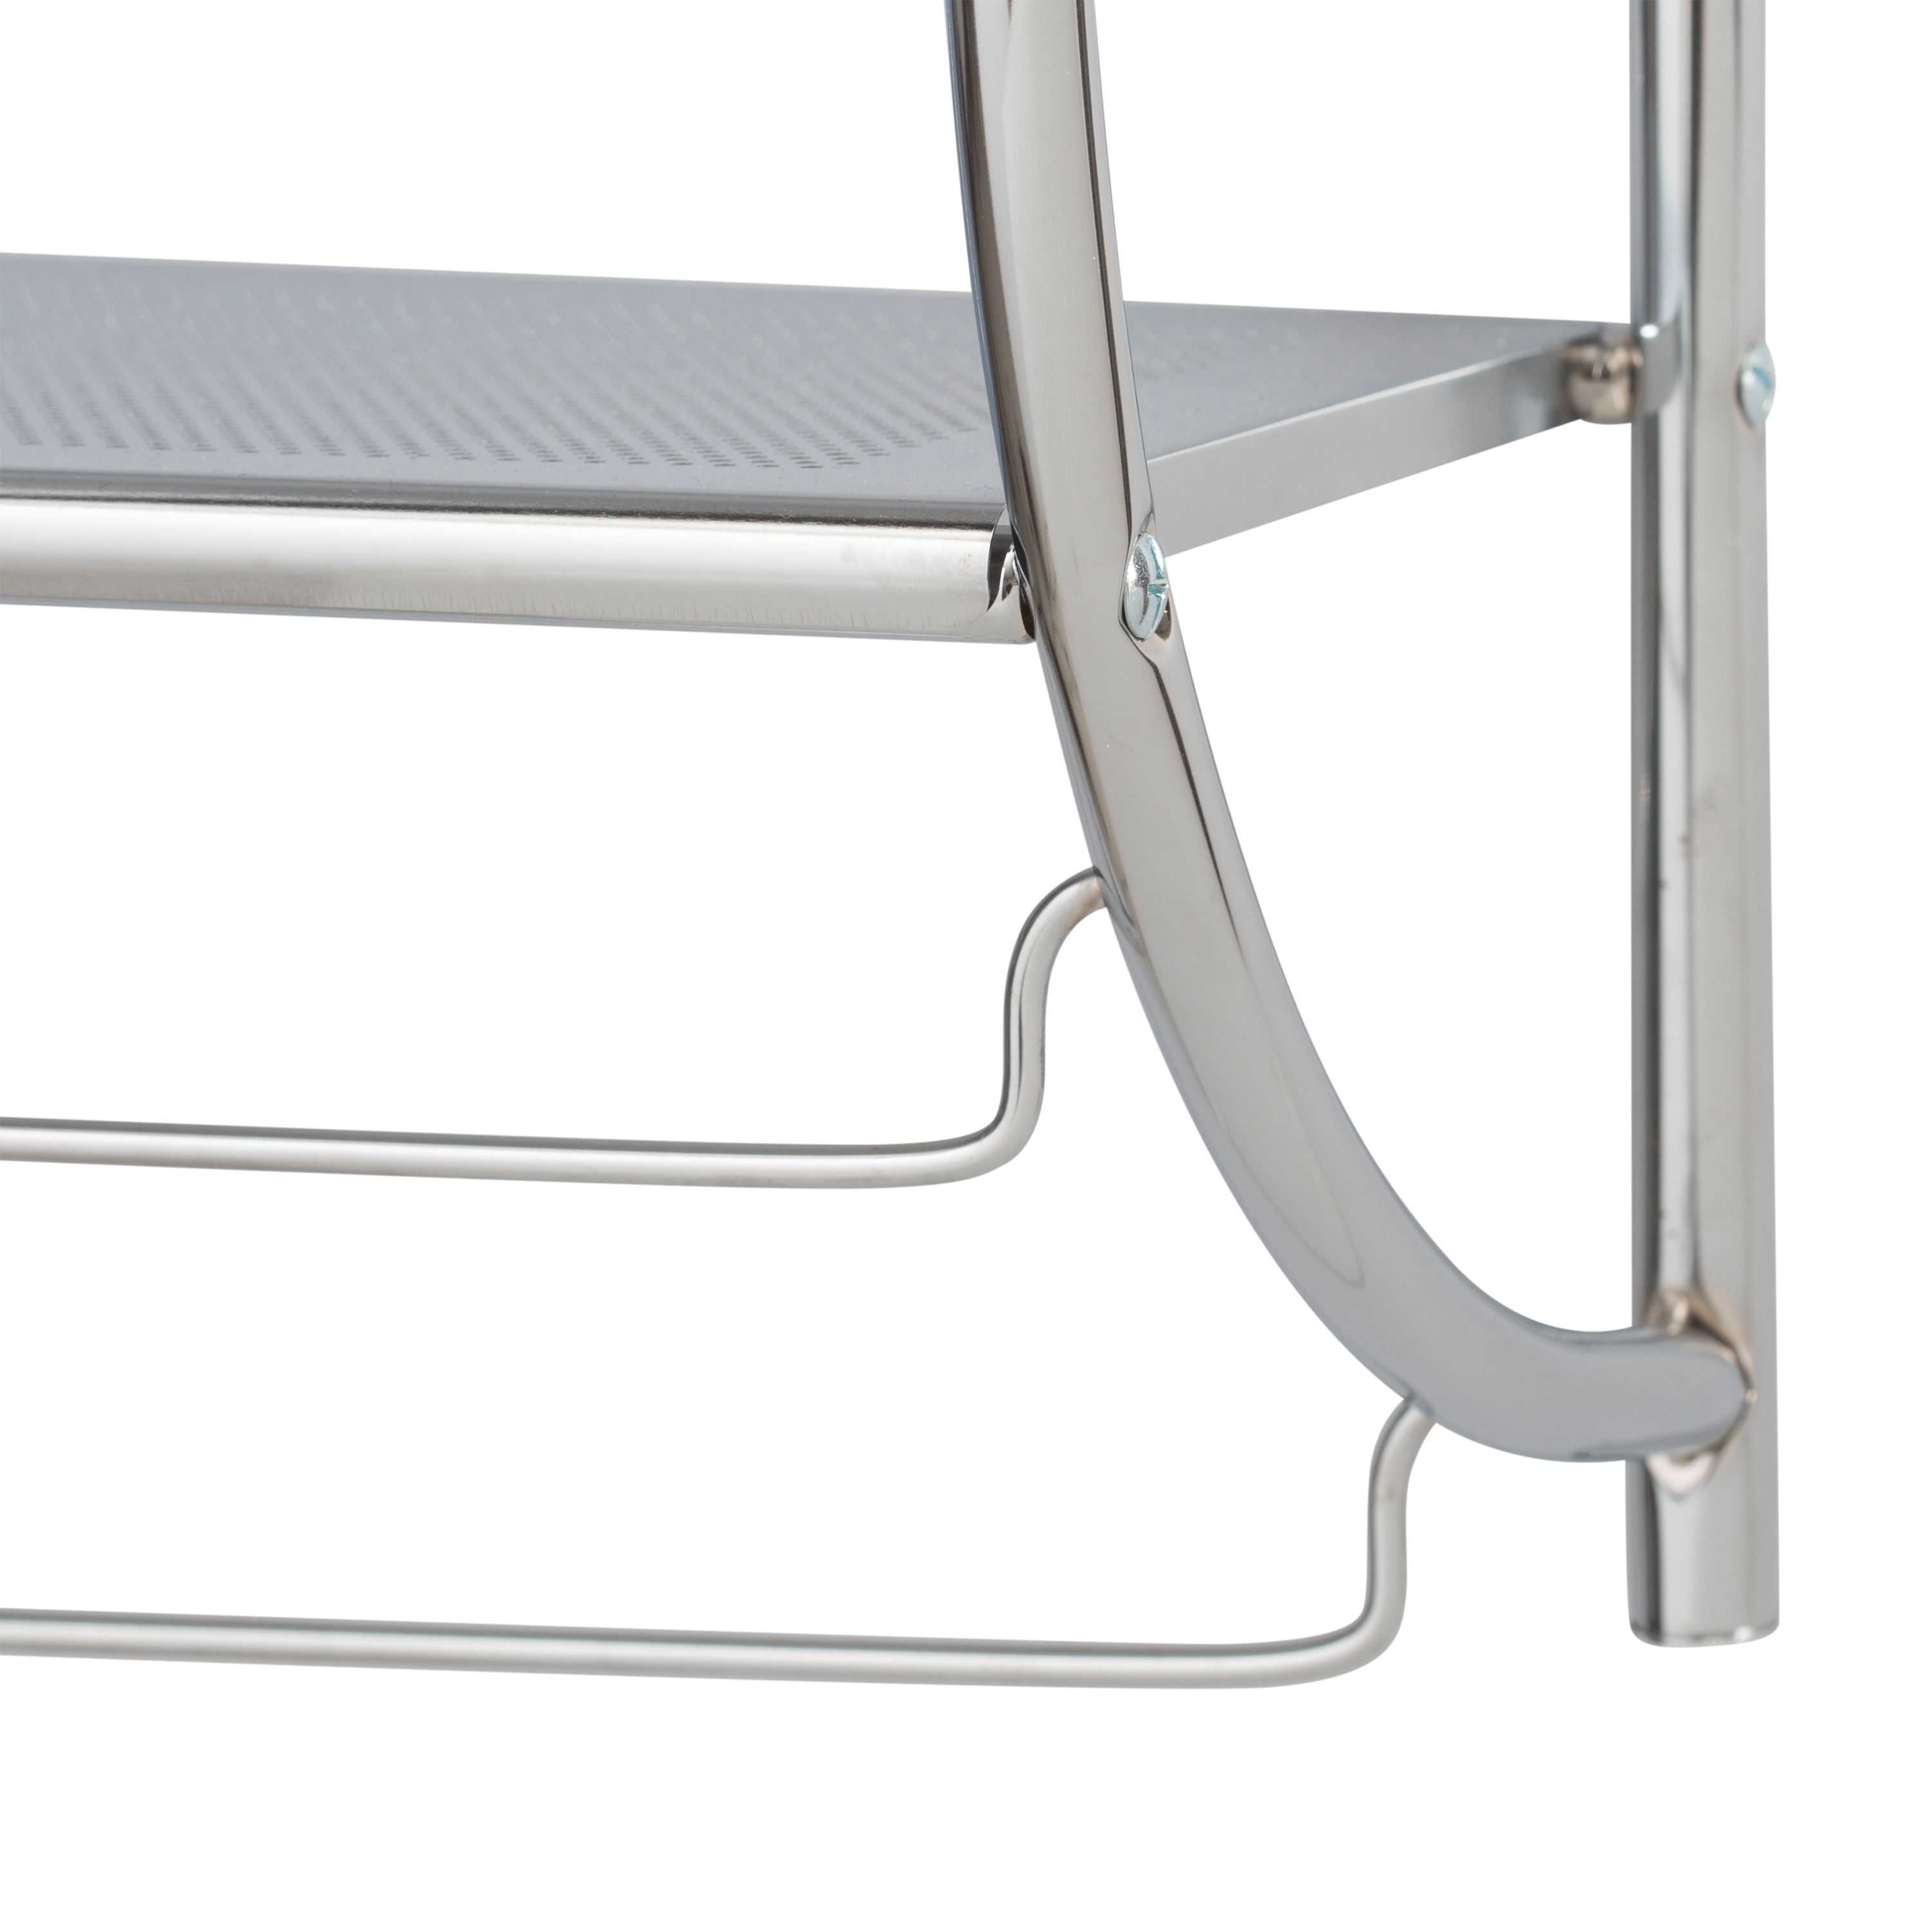 Organize It All 2 Tier Metal Wall Mount Shelf with Towel Bars, Chrome - image 4 of 7